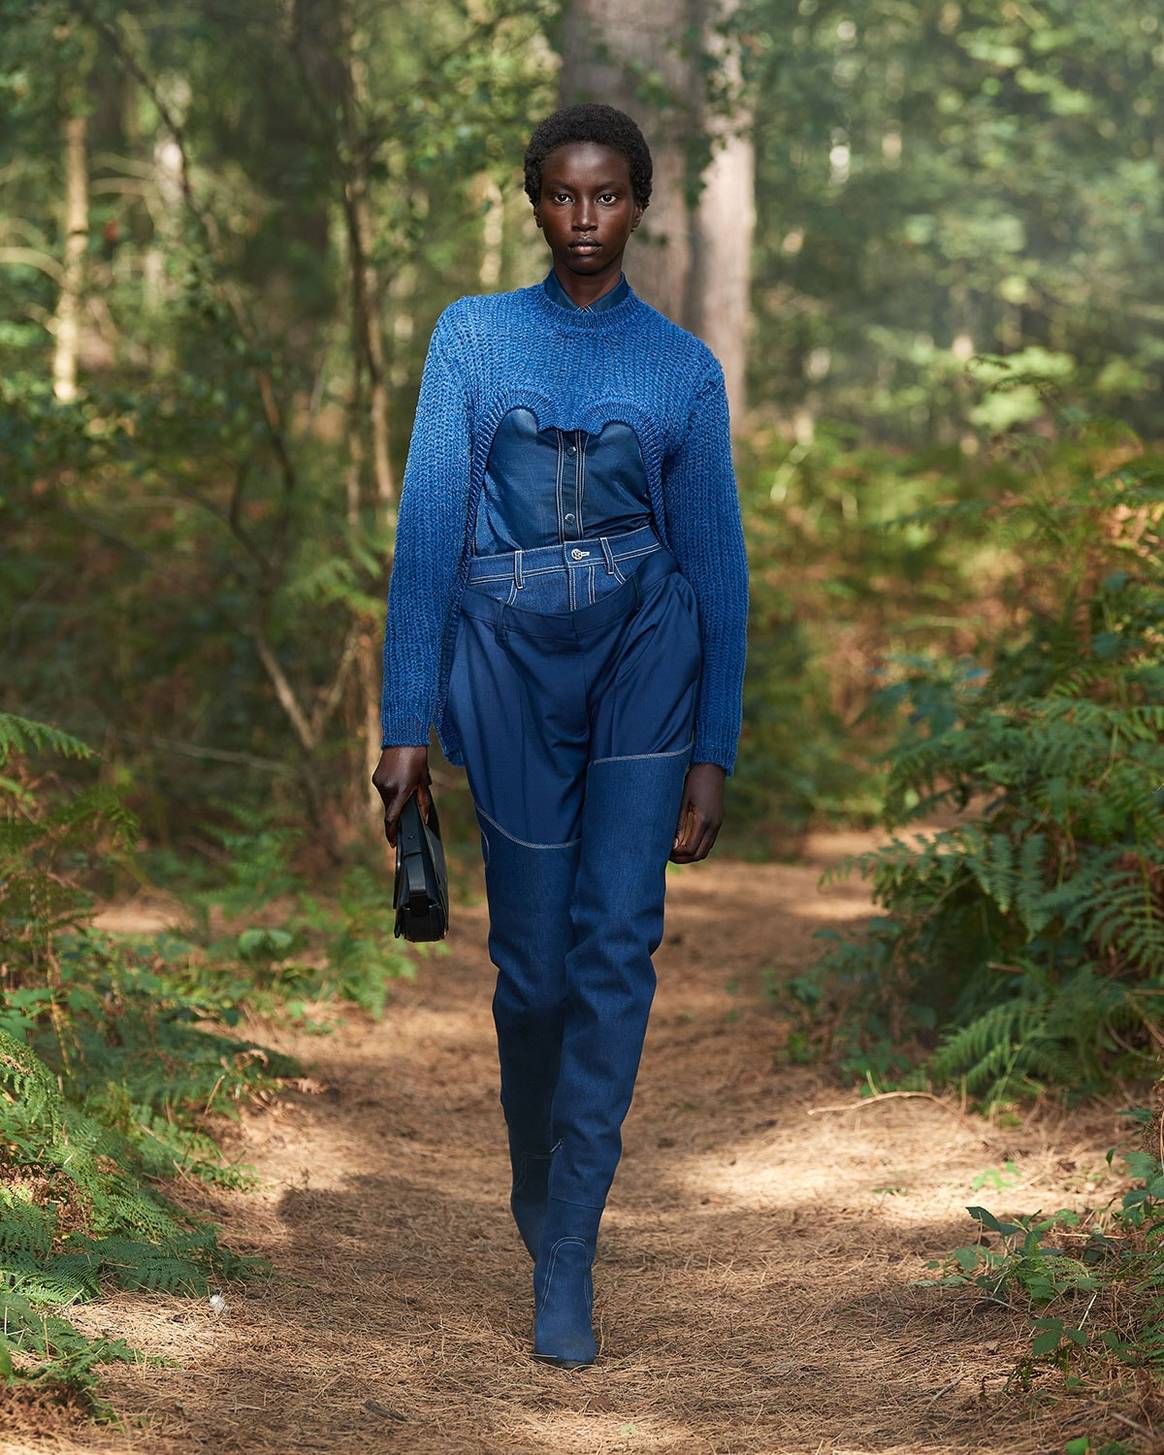 Spotted on the catwalk: Pantone's spring/summer 2021 fashion colours